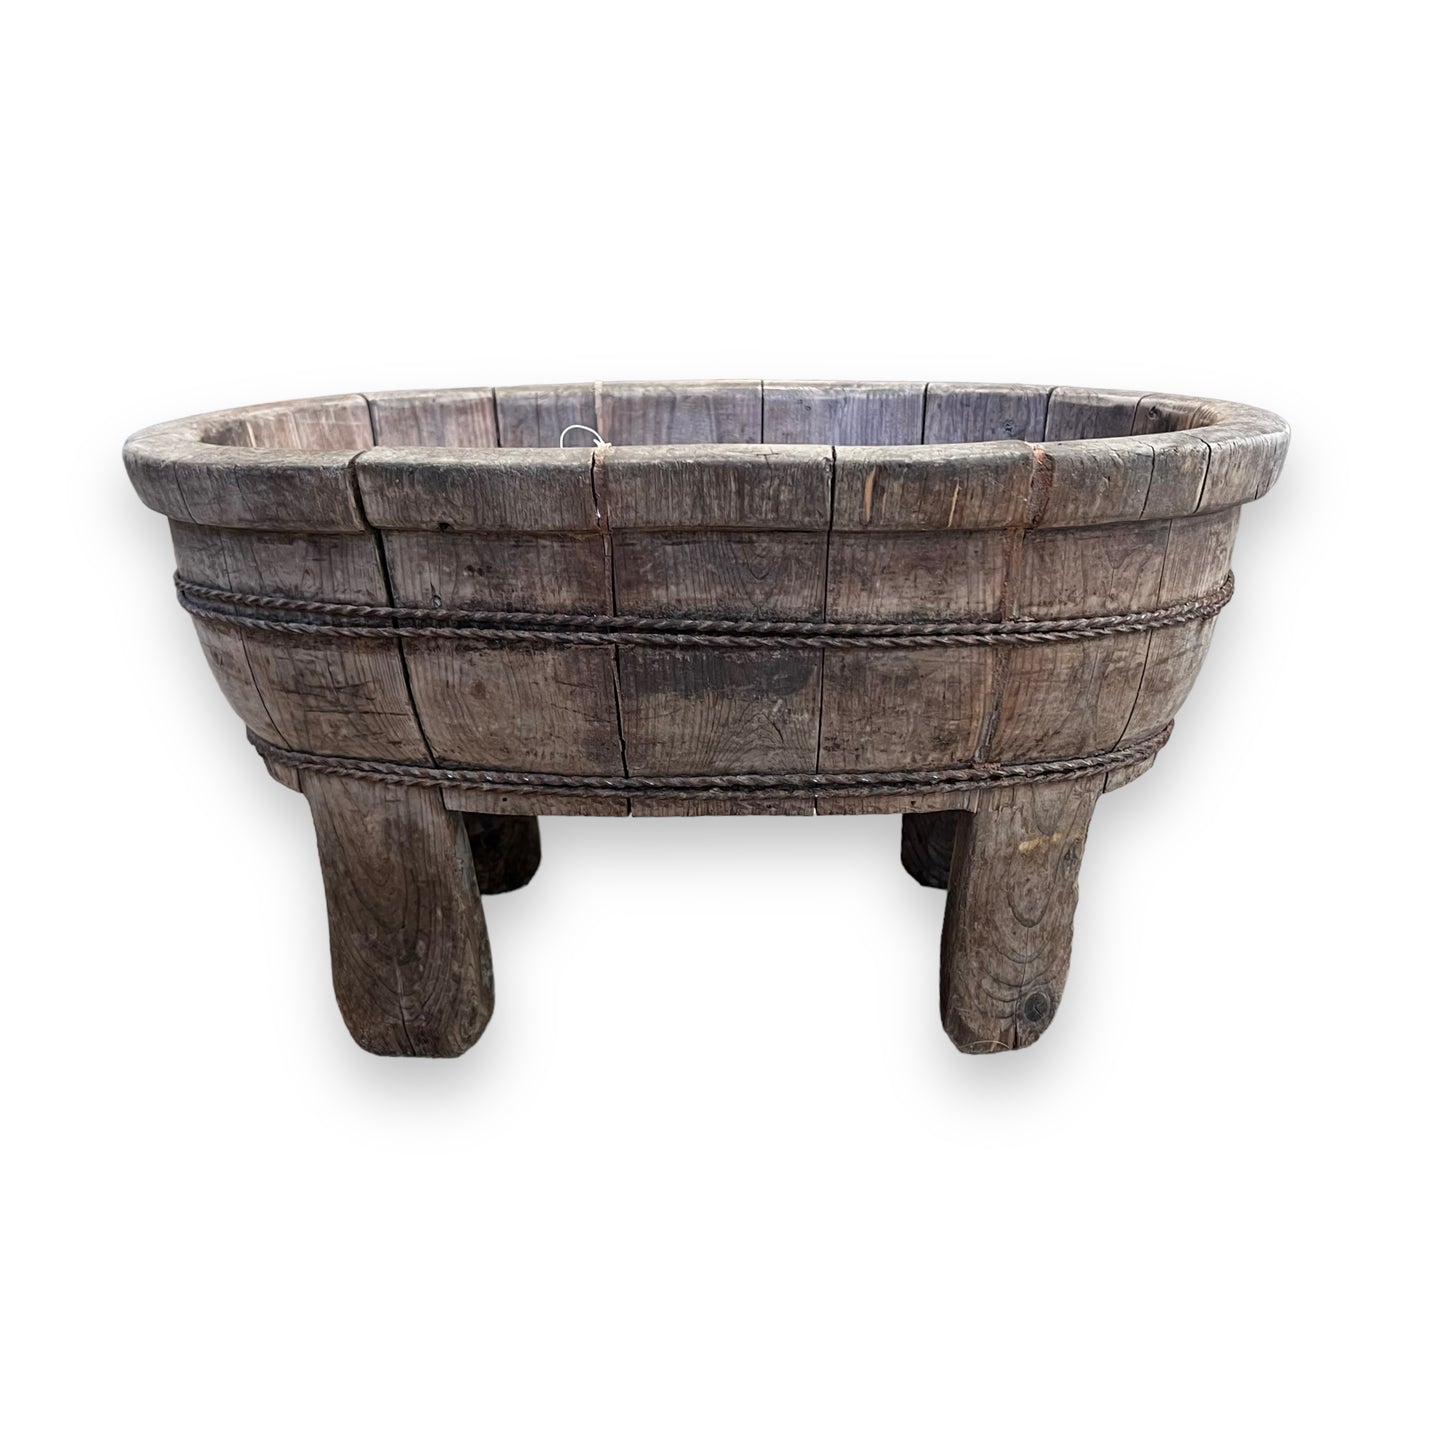 Late 19th Century Chinese Hand Made Wooden Wash/Laundry Basin - DeFrenS